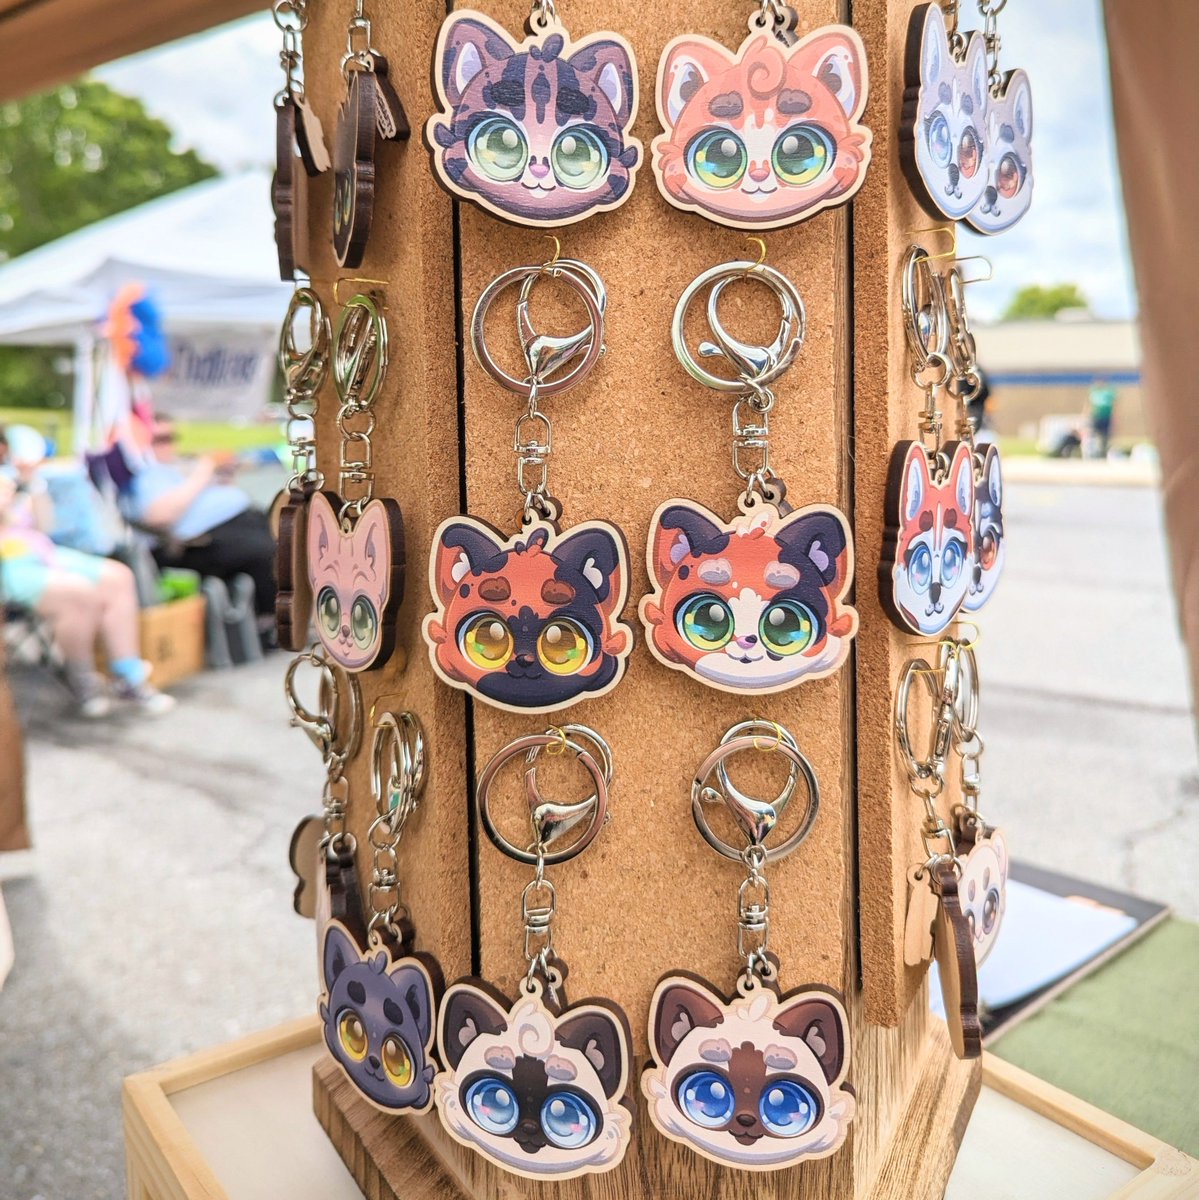 Chibi cat keychains ~ More patterns to come!
🐱🐾
.
#catkeychain #ecofriendly #cuteartist